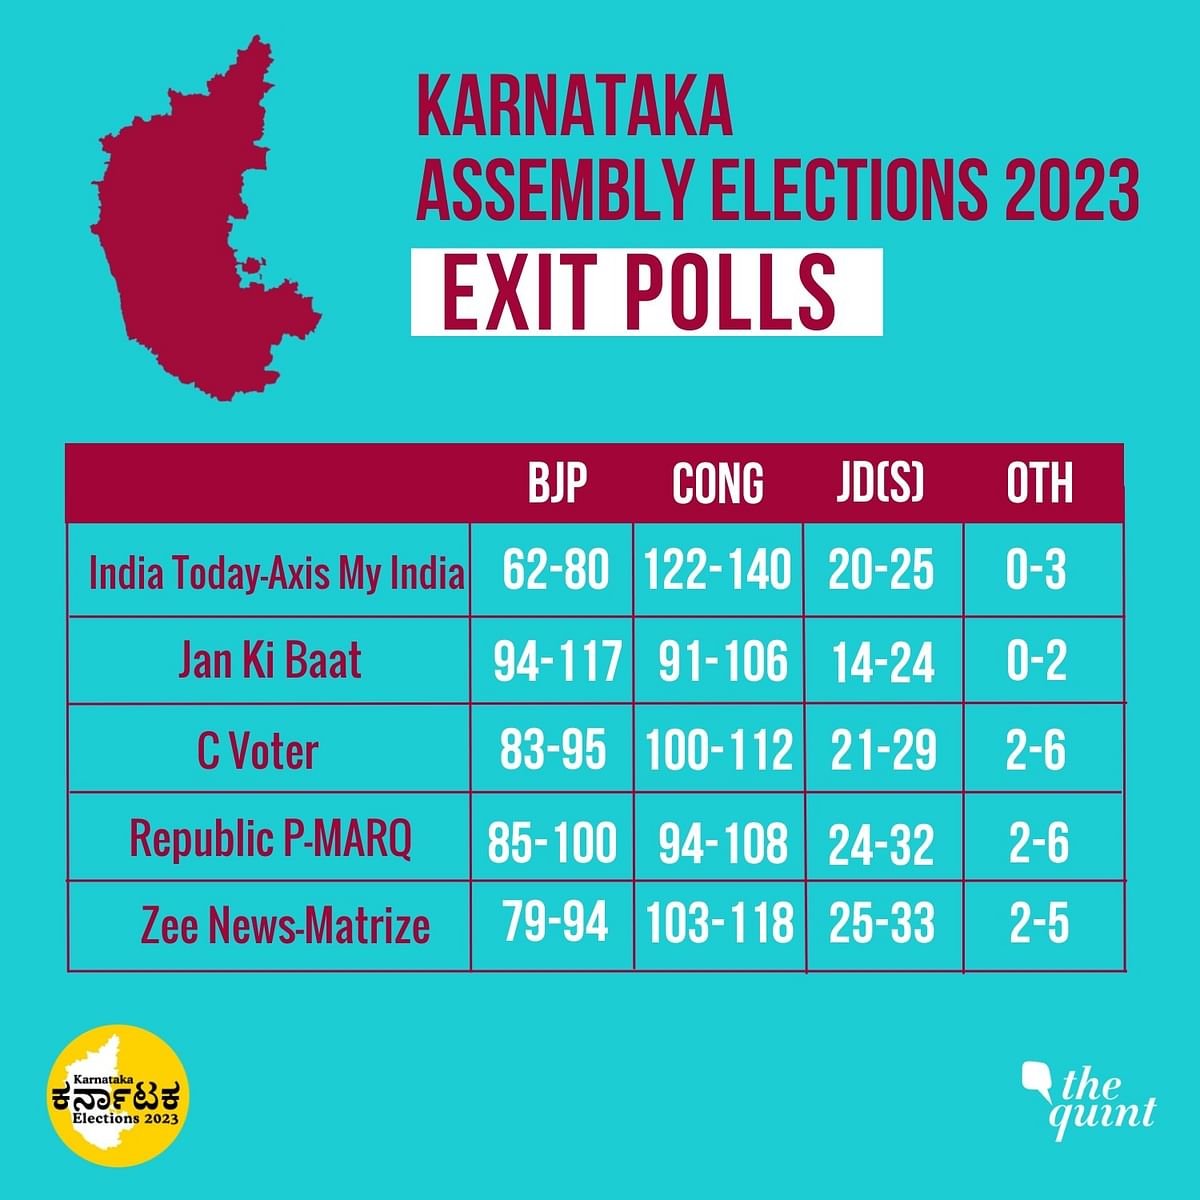 Did the exit polls get it right this time around in Karnataka?